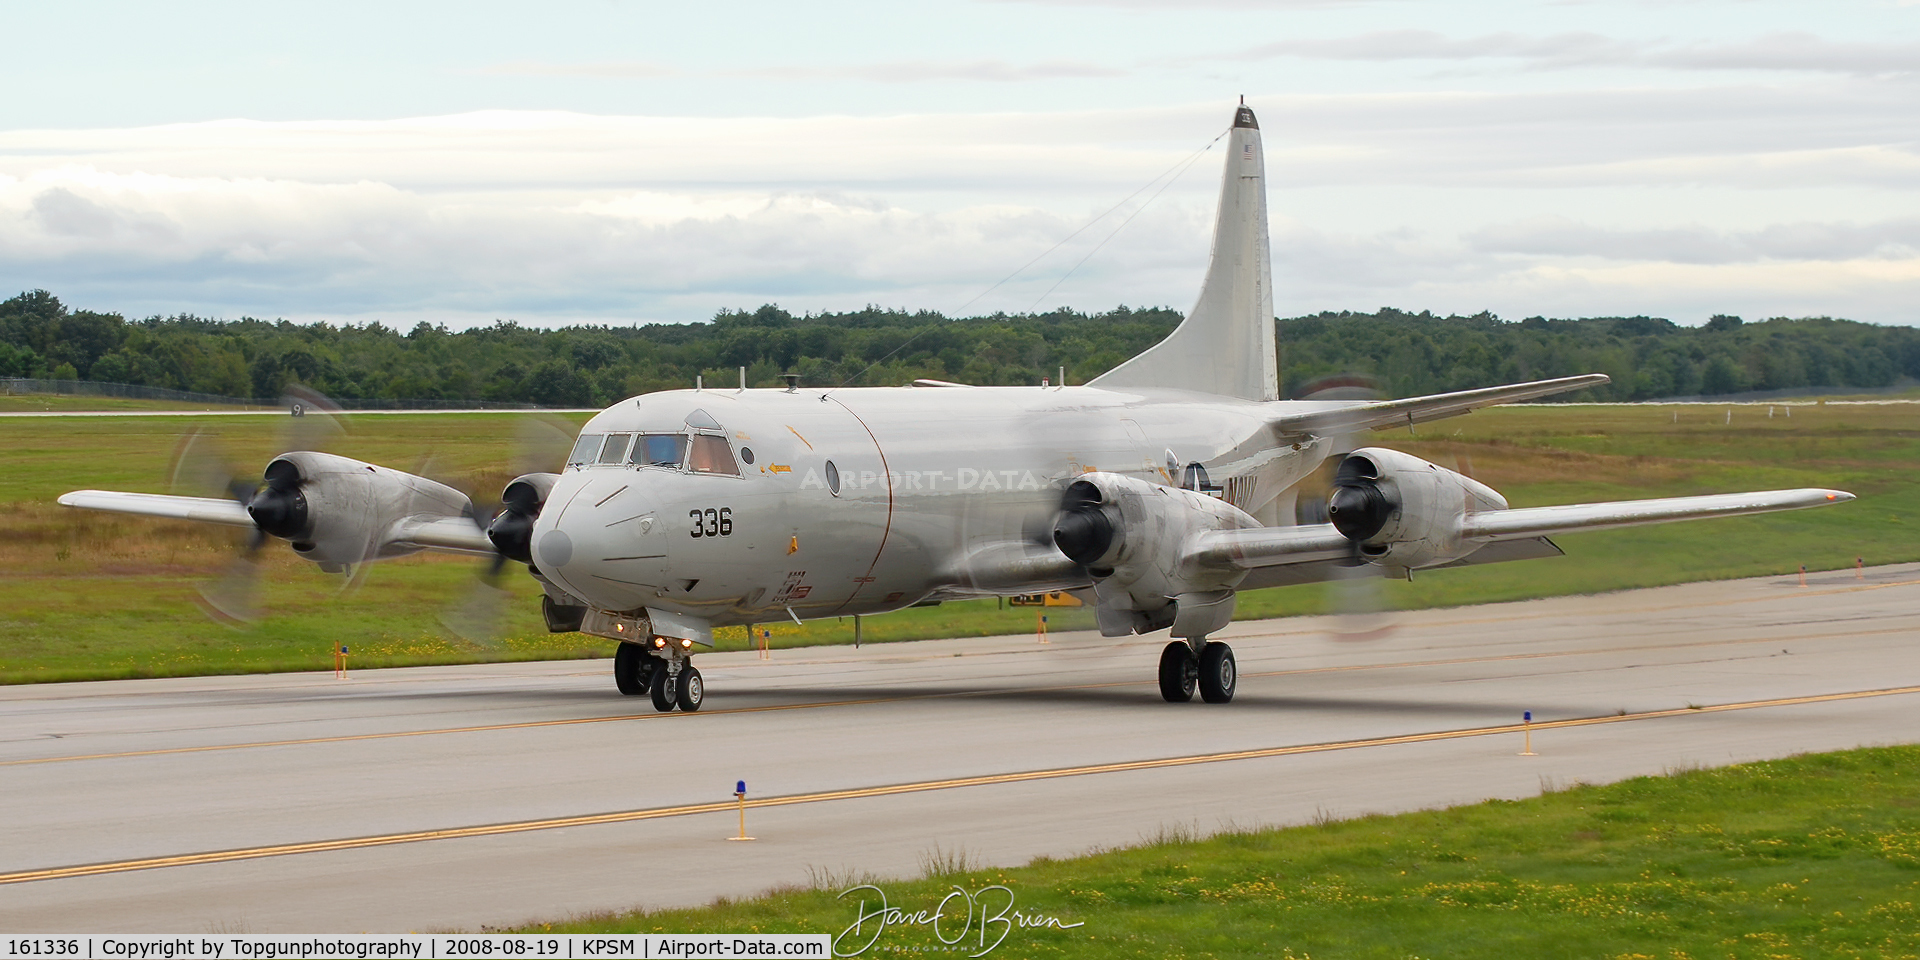 161336, Lockheed P-3C Orion C/N 285A-5735, taxiing back to RW34